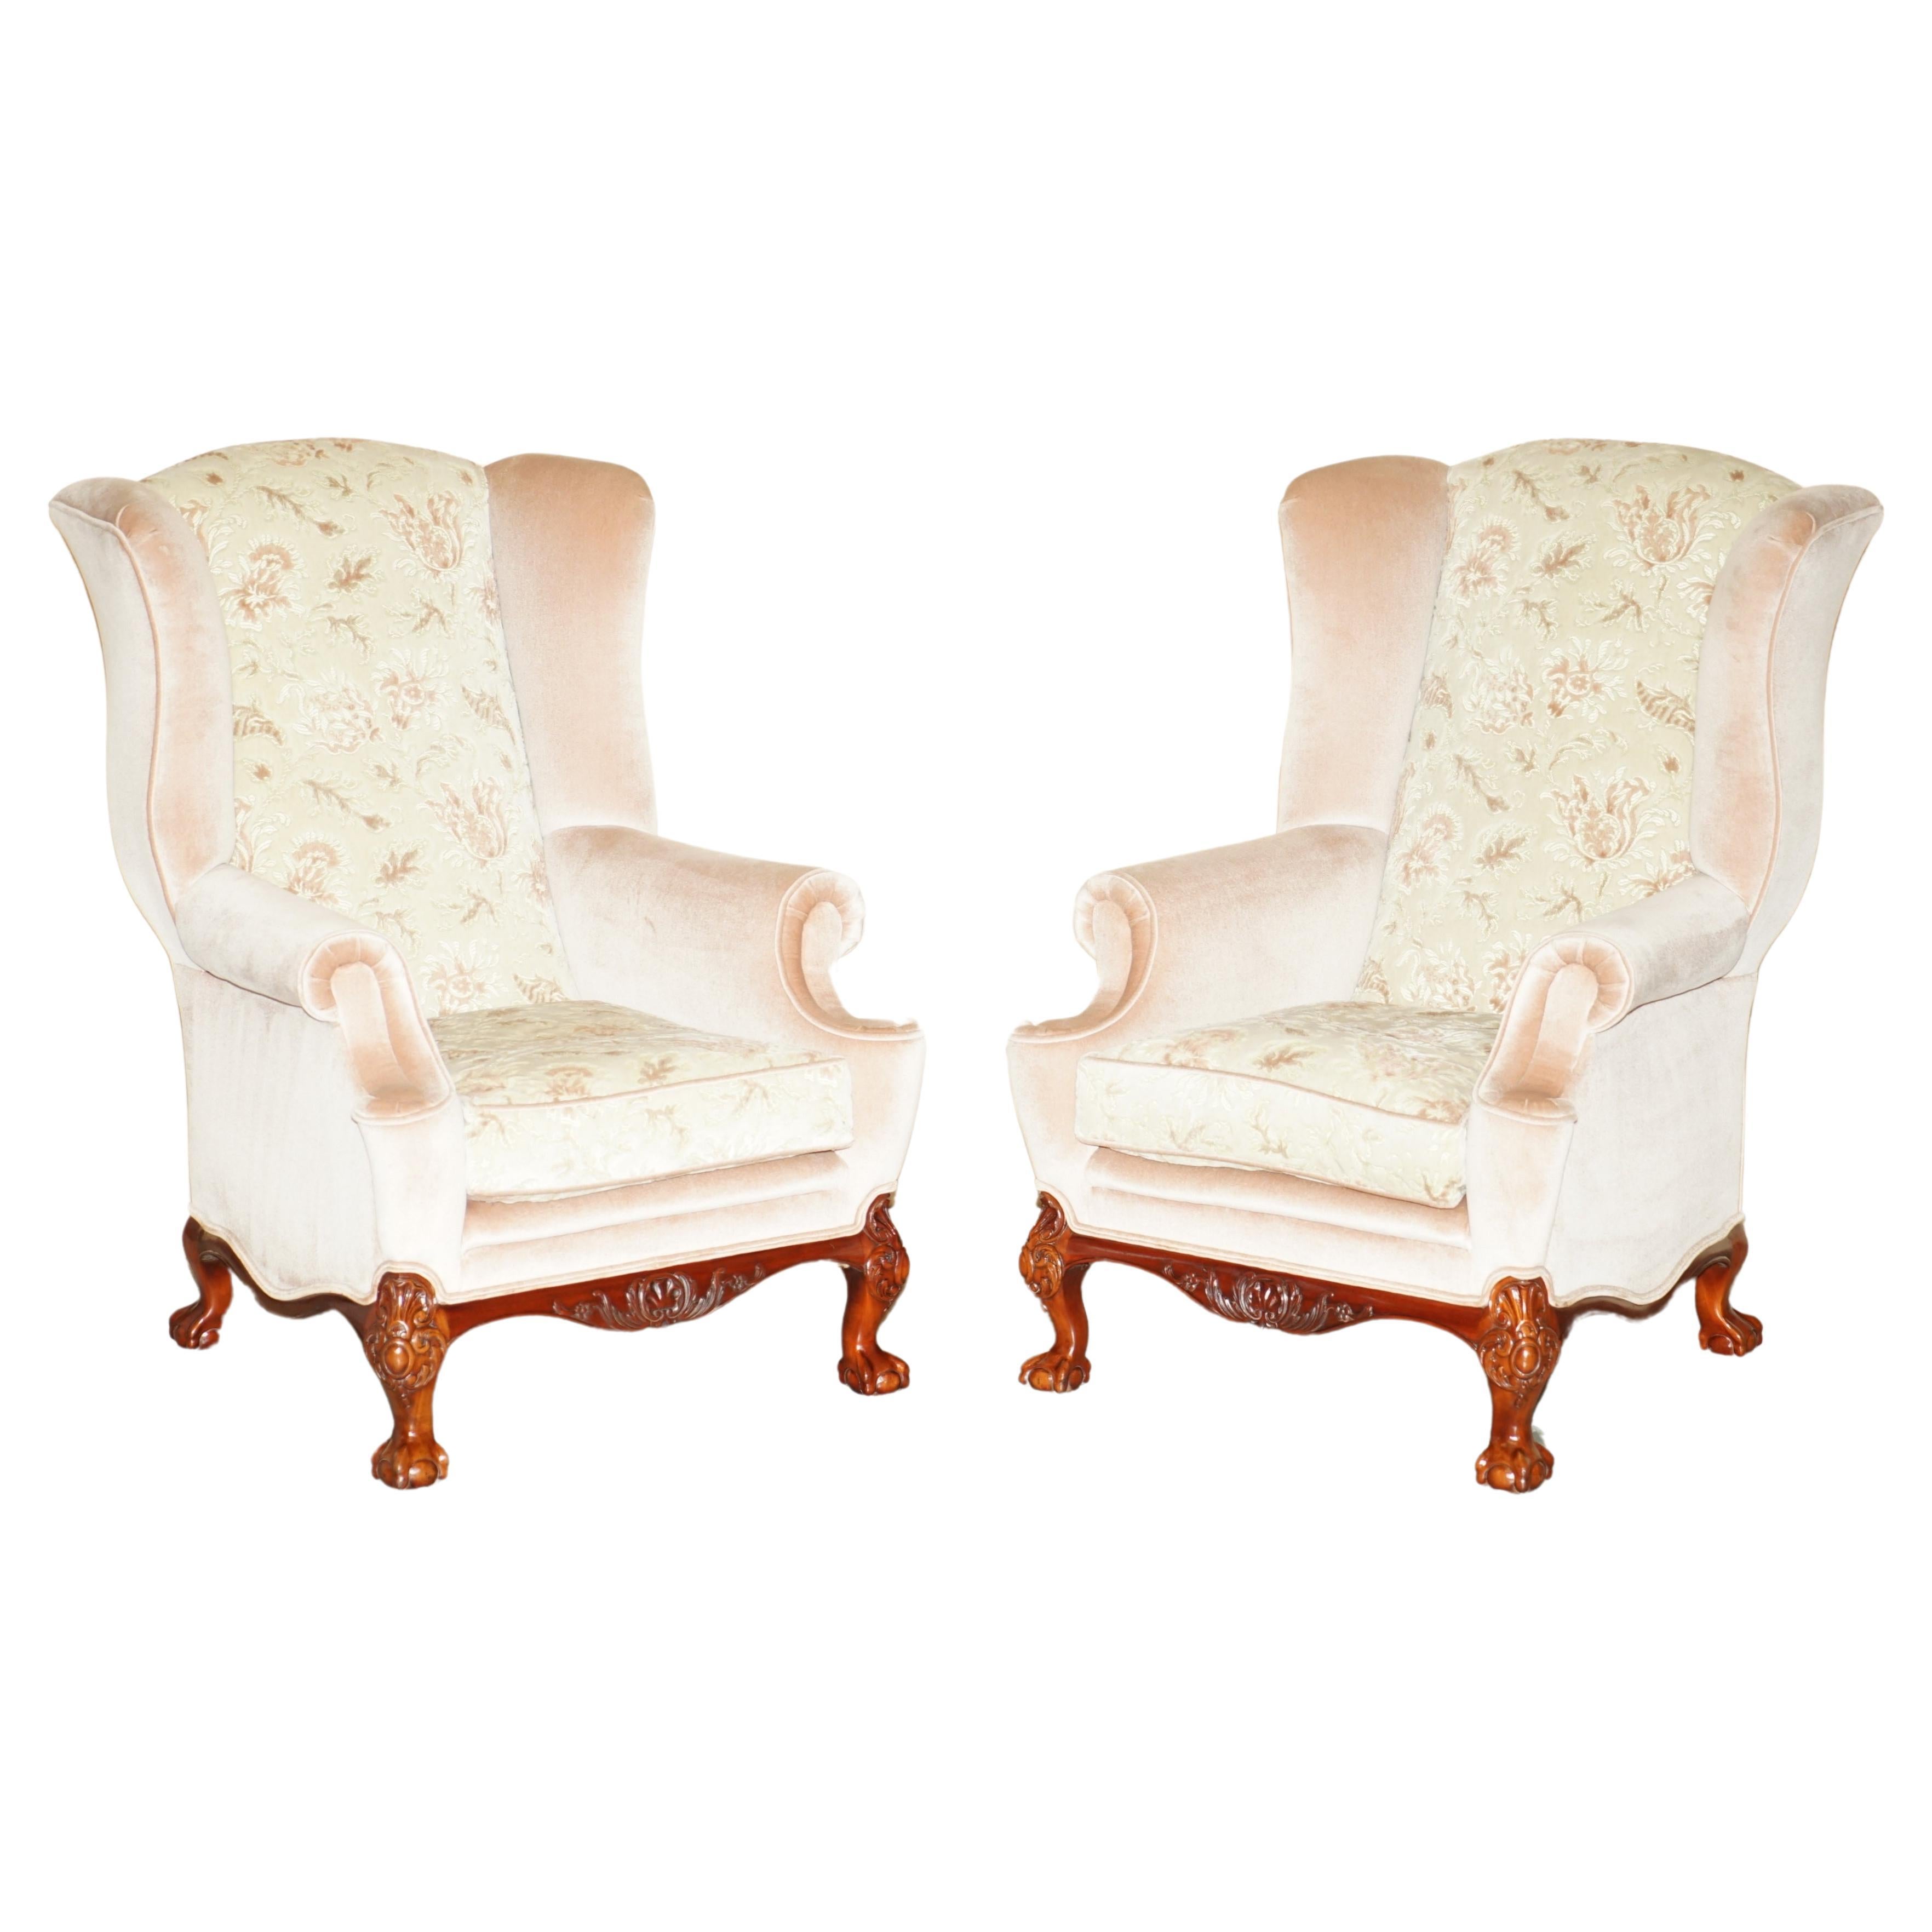 STUNNING PAIR OF VICTORIAN STYLE CLAW & BALL FEET FLORAL WINGBACK ARMCHAIRs